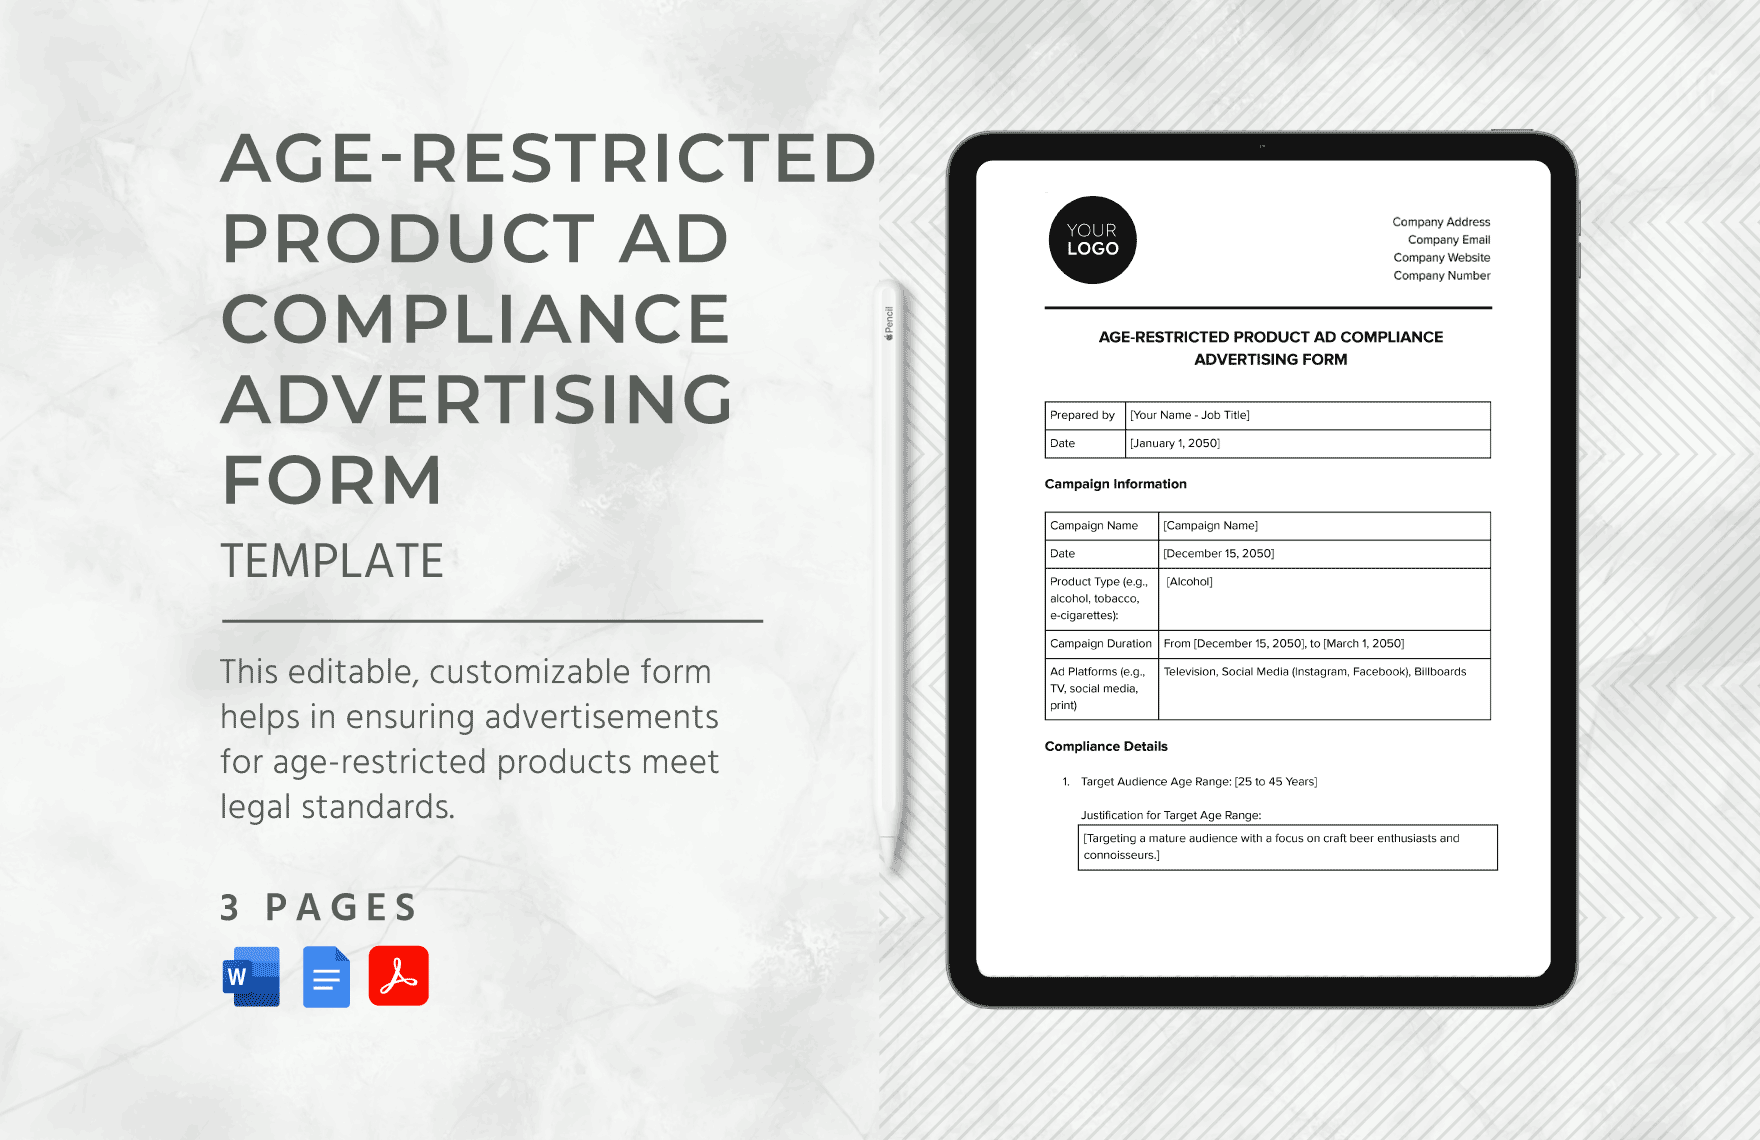 Age-Restricted Product Ad Compliance Advertising Form Template in Word, Google Docs, PDF